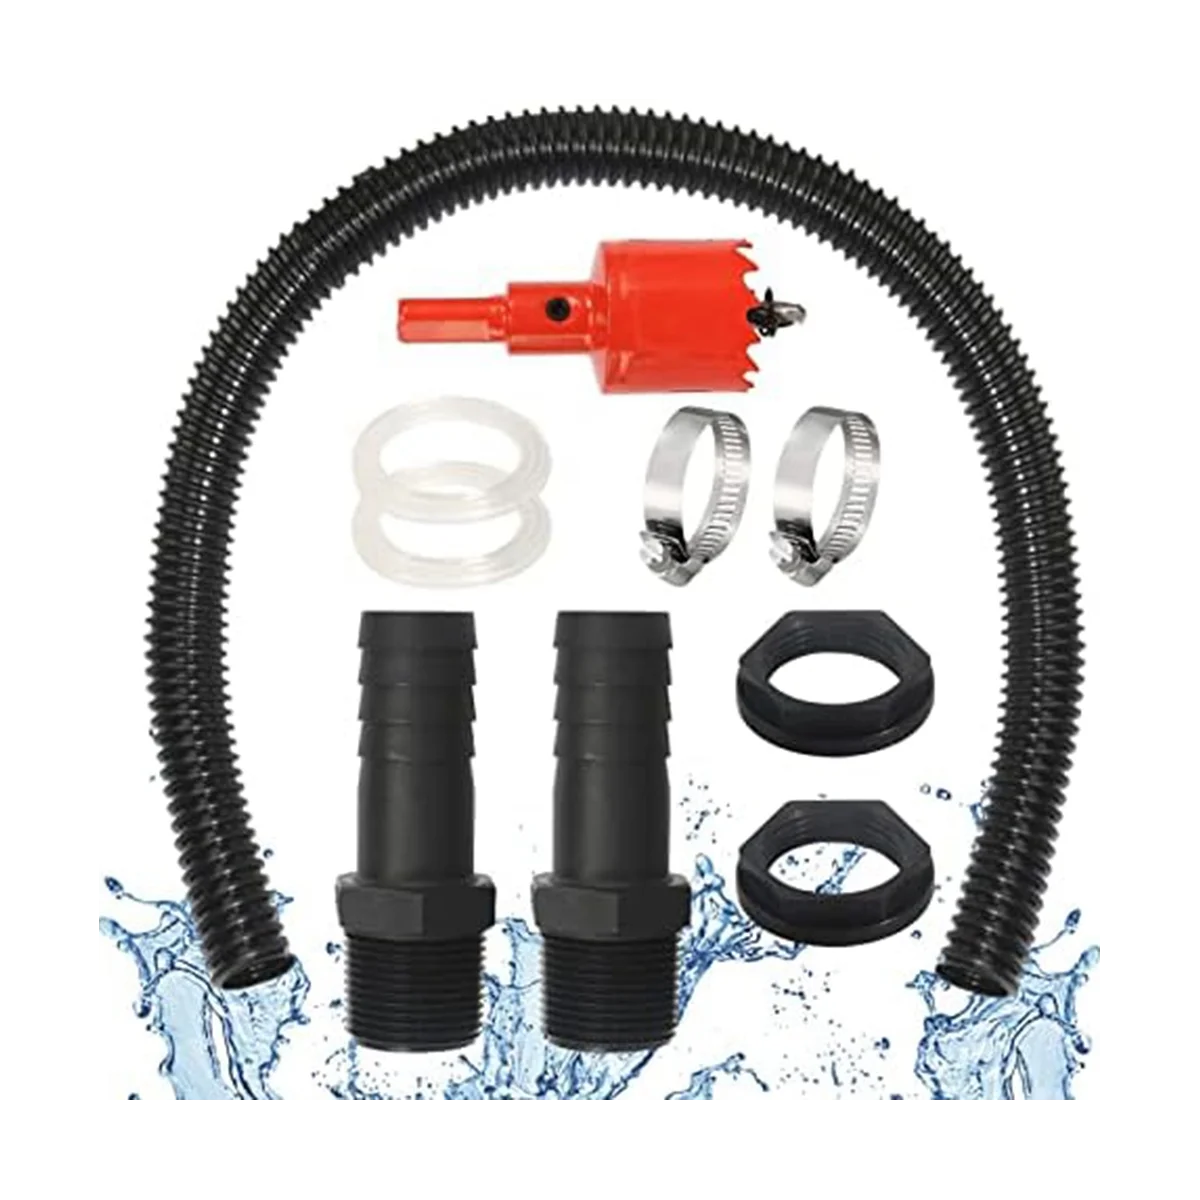 

Rain Butt Connection Set, 2 Water Butt Through 1 Inch 100 cm Connection Hose 25 mm and Hole Opener,for Rainwater Barrels